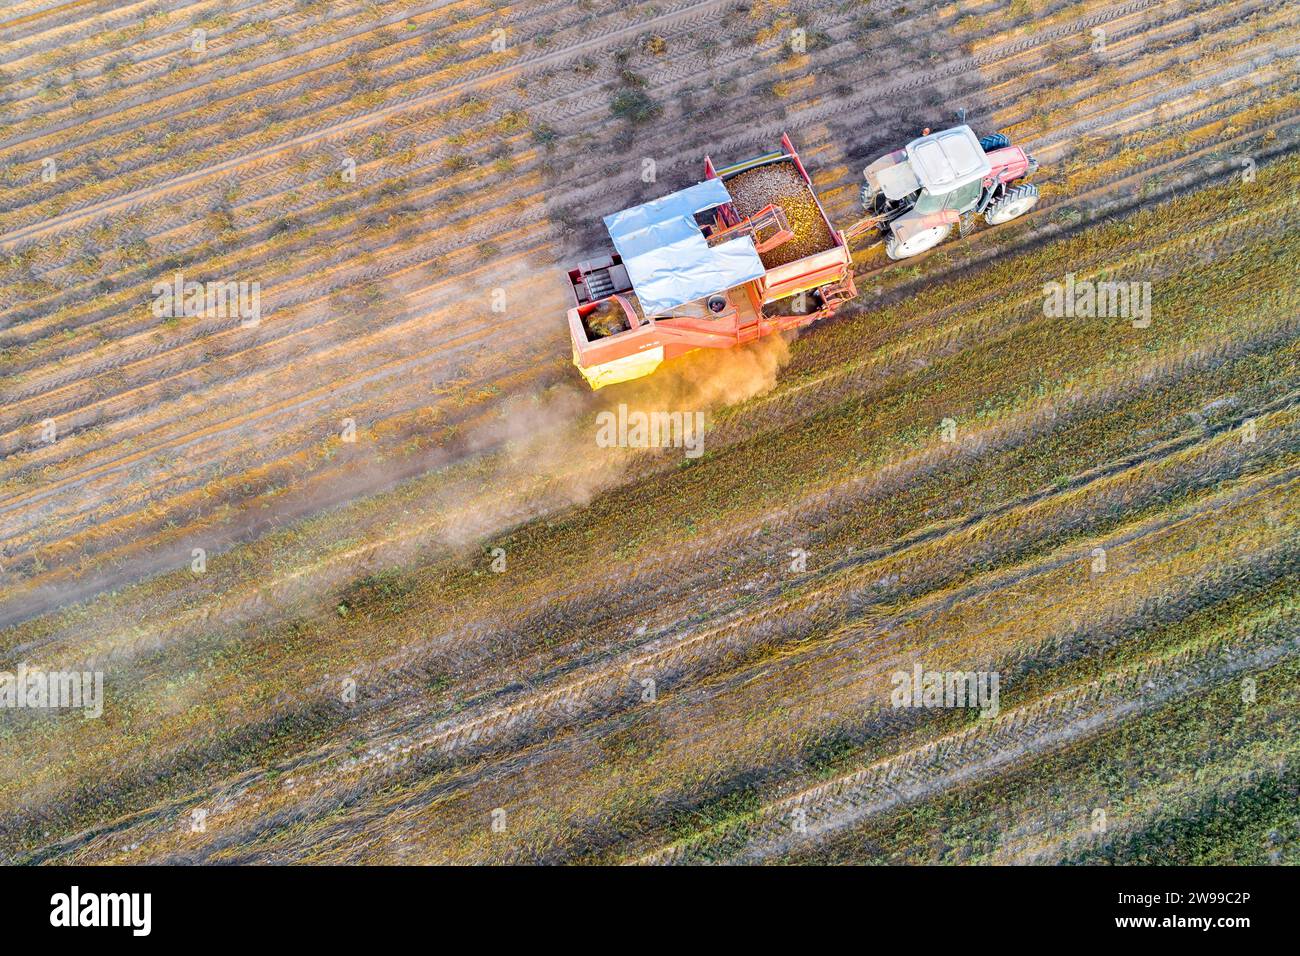 drone view of agricultural machinery working in the potato crop Stock Photo